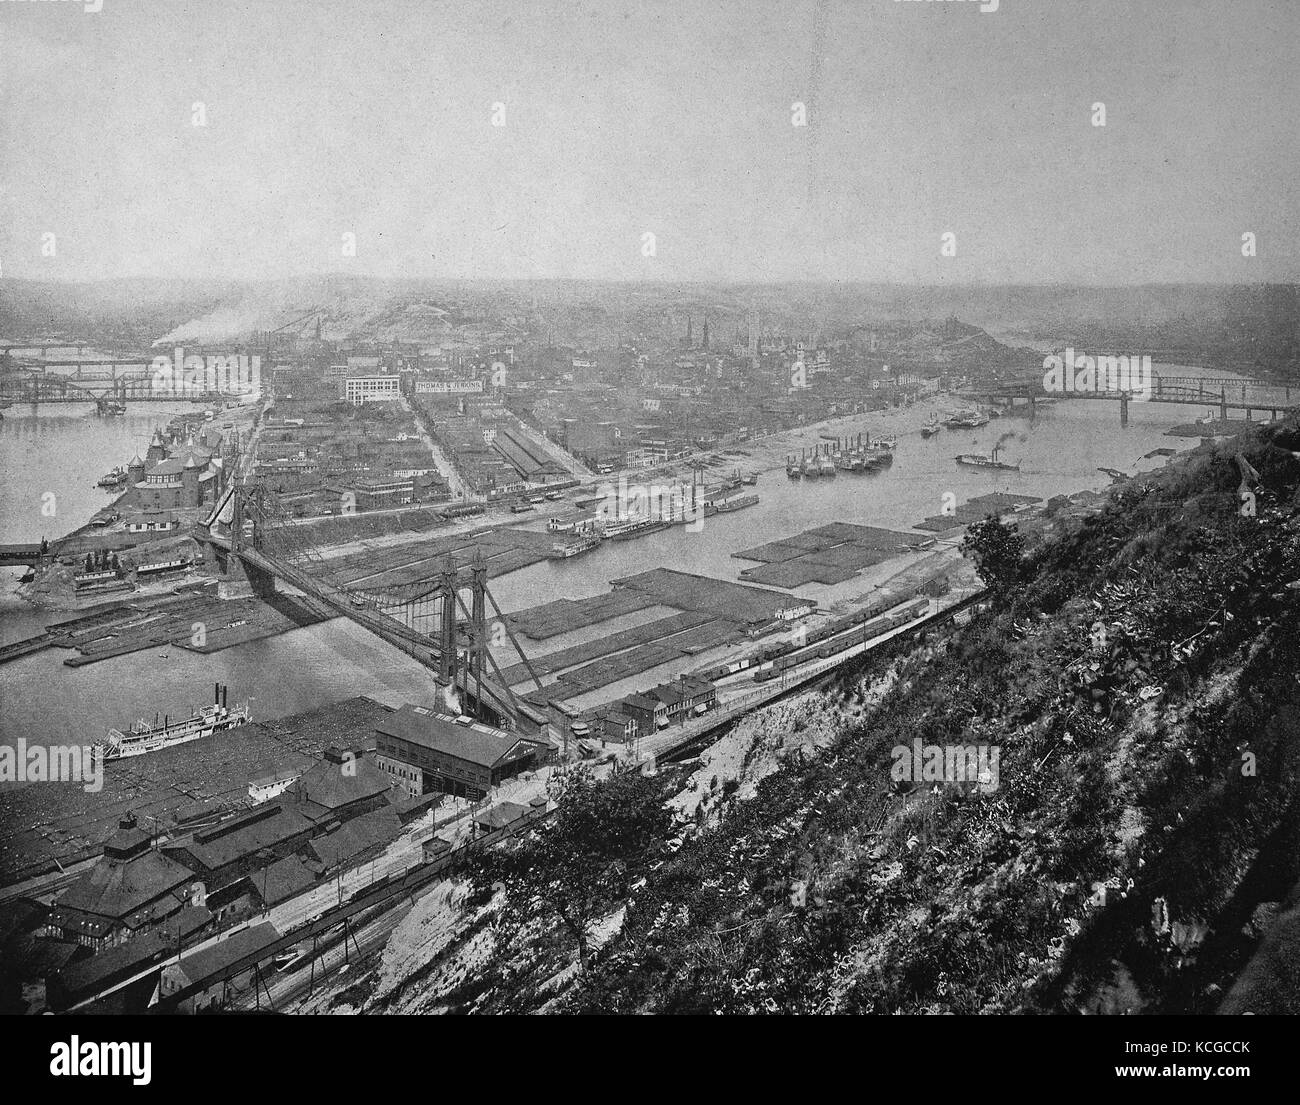 United States of America, View of the large industrial city of Pittsburgh in state of Pennsylvania on the rivers Monongahela and Allegheny, digital improved reproduction of a historical photo from the (estimated) year 1899 Stock Photo